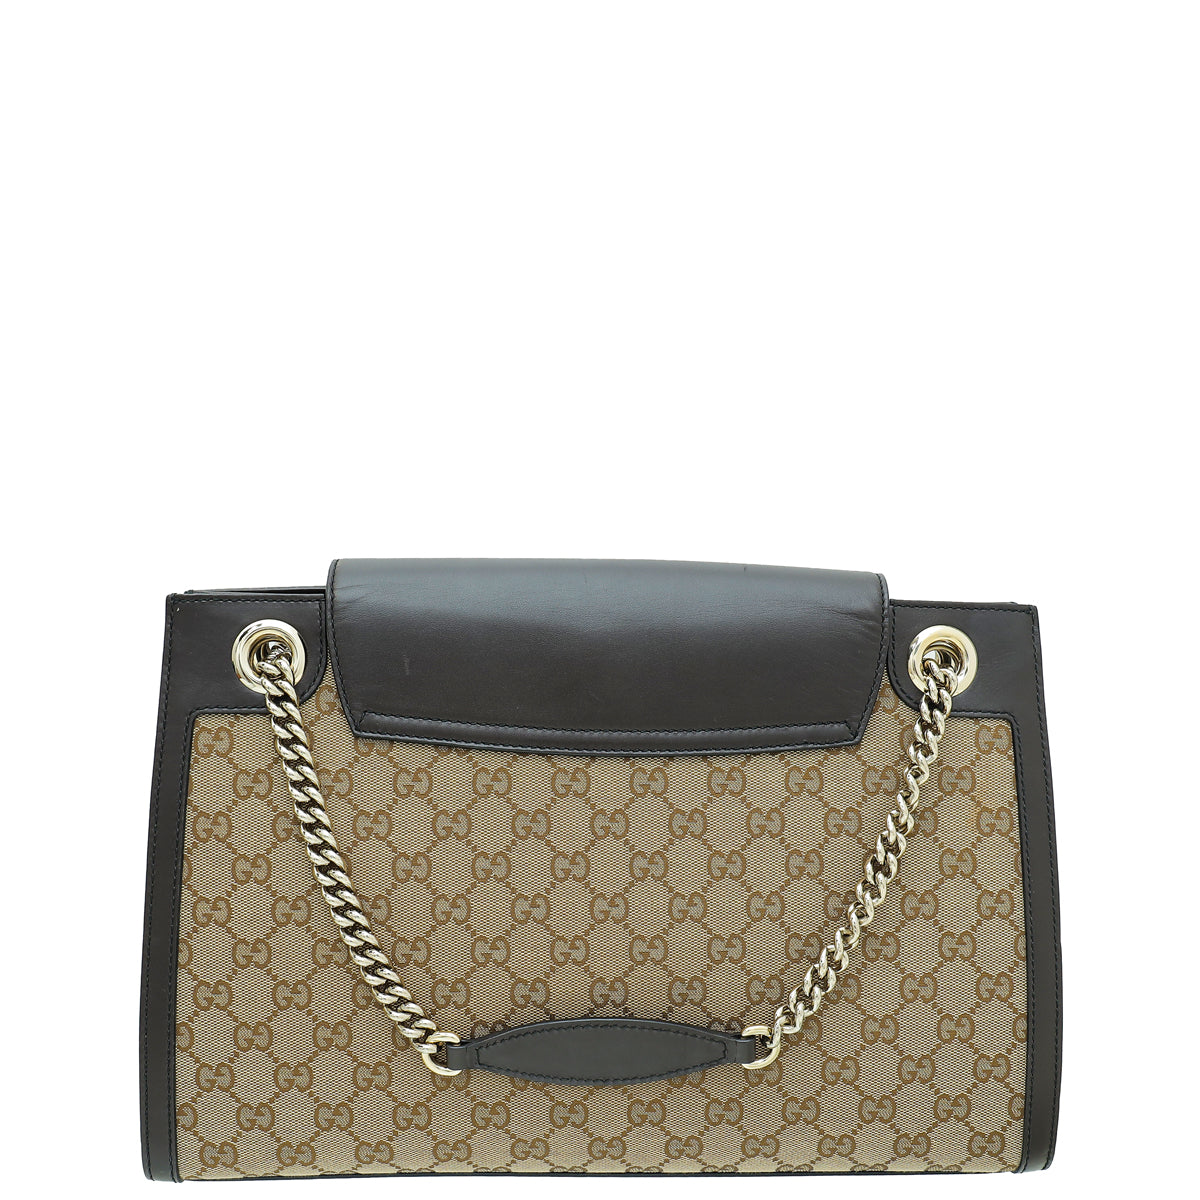 Gucci Bicolor GG Emily Large Bag